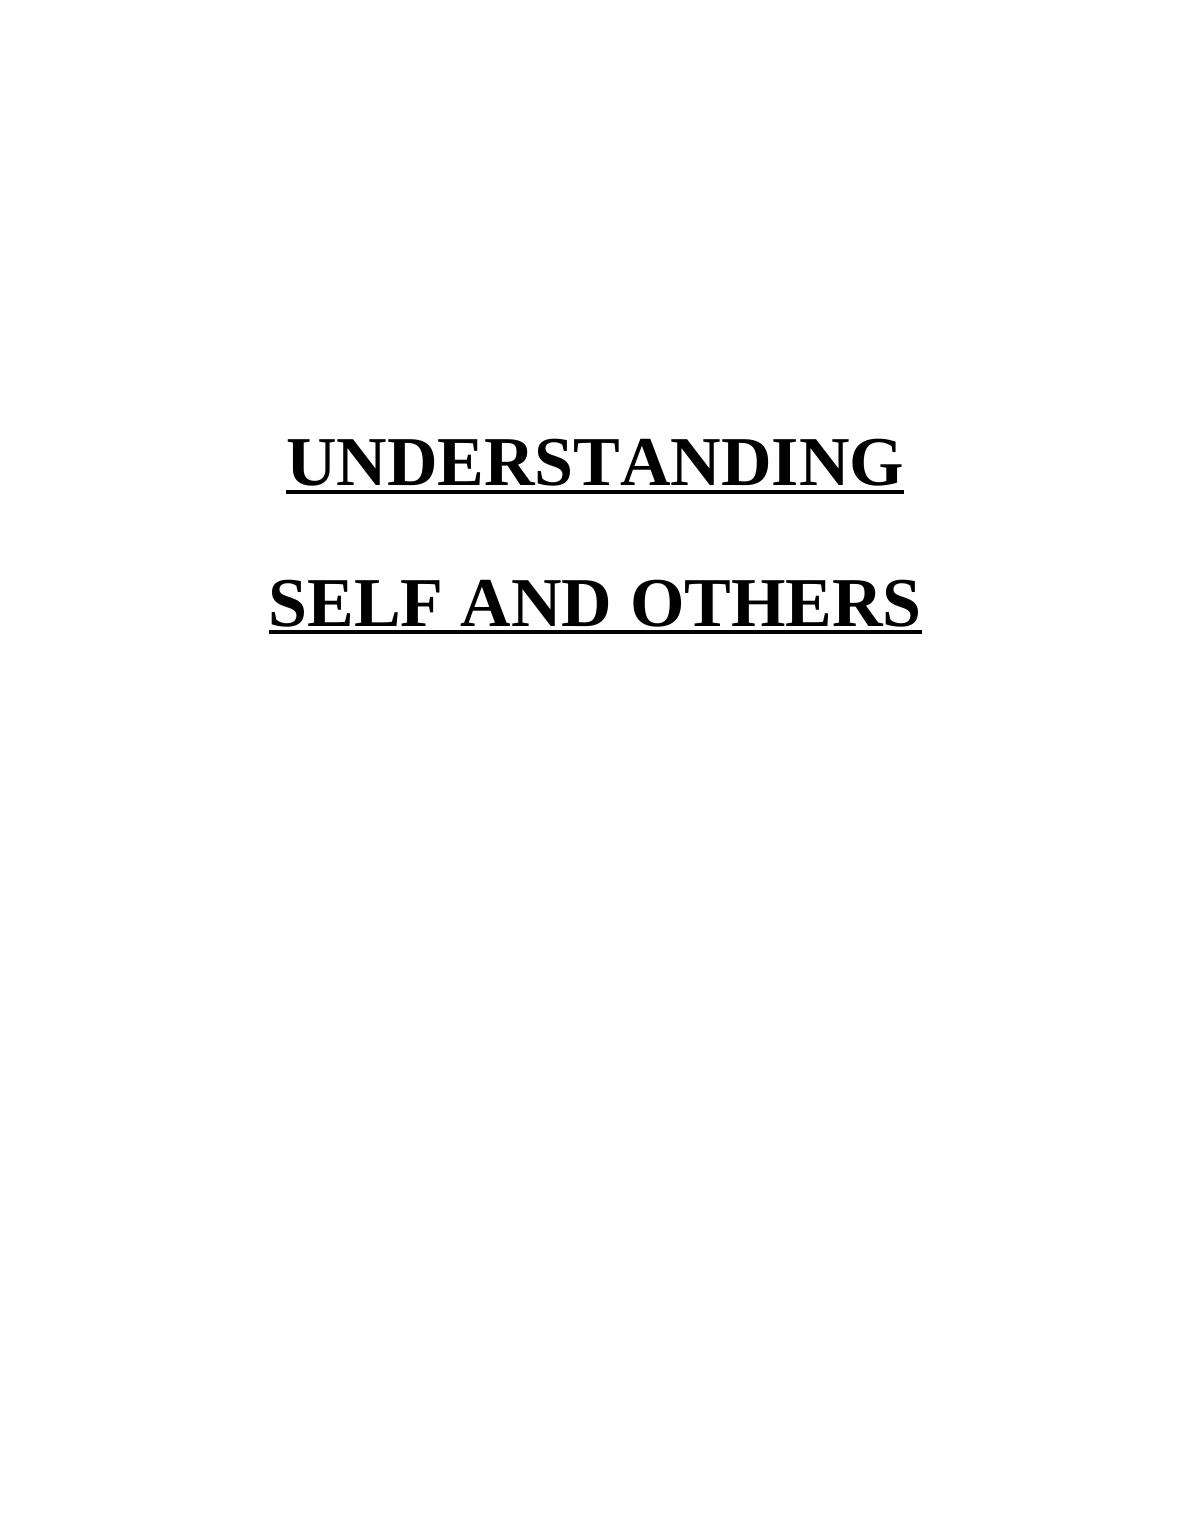 Process of Self - assessment and Development : Report_1